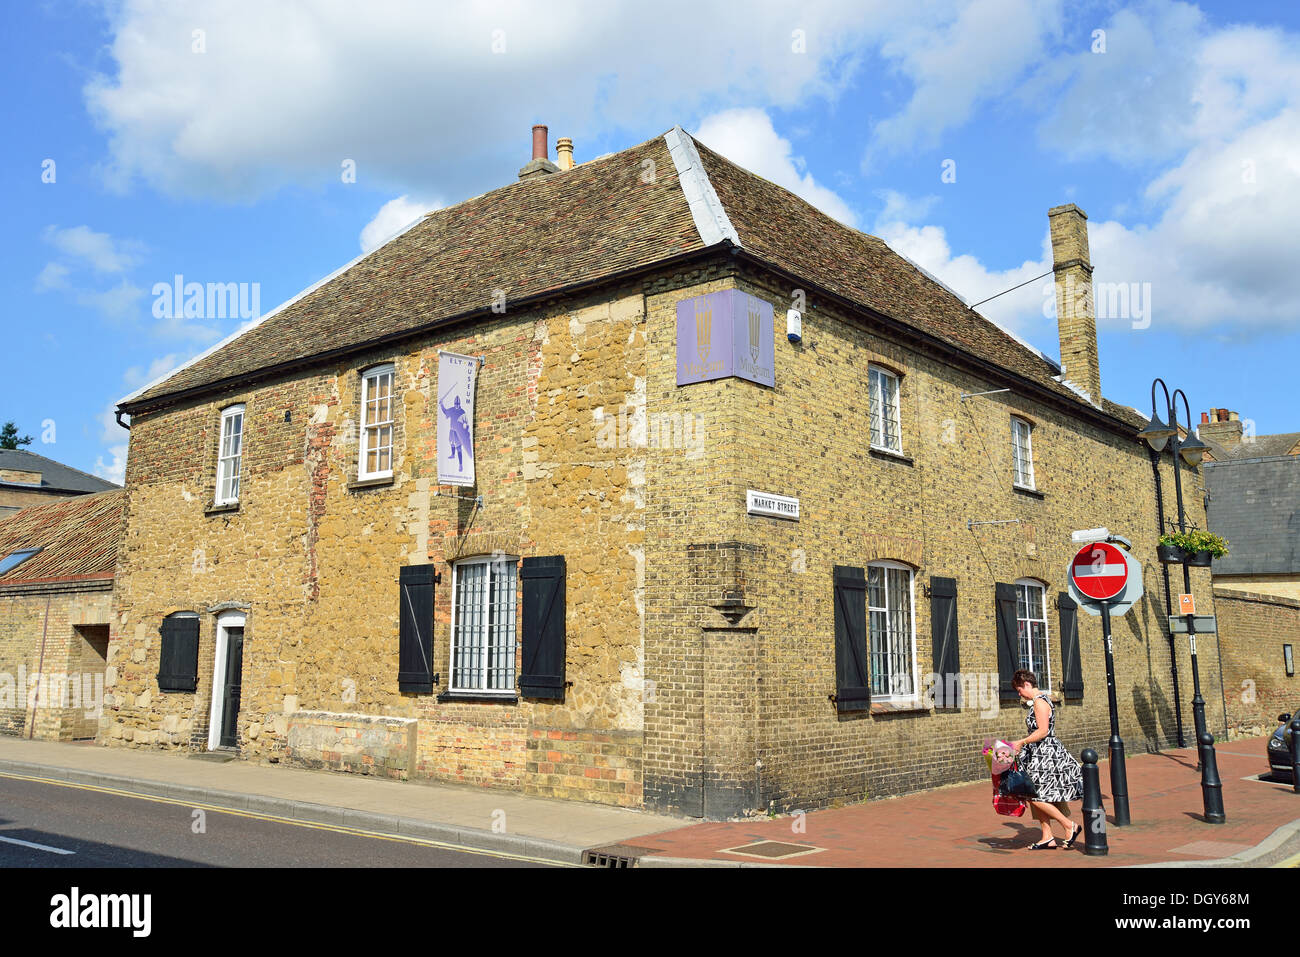 Ely Museum, rue Market, Ely, Cambridgeshire, Angleterre, Royaume-Uni Banque D'Images